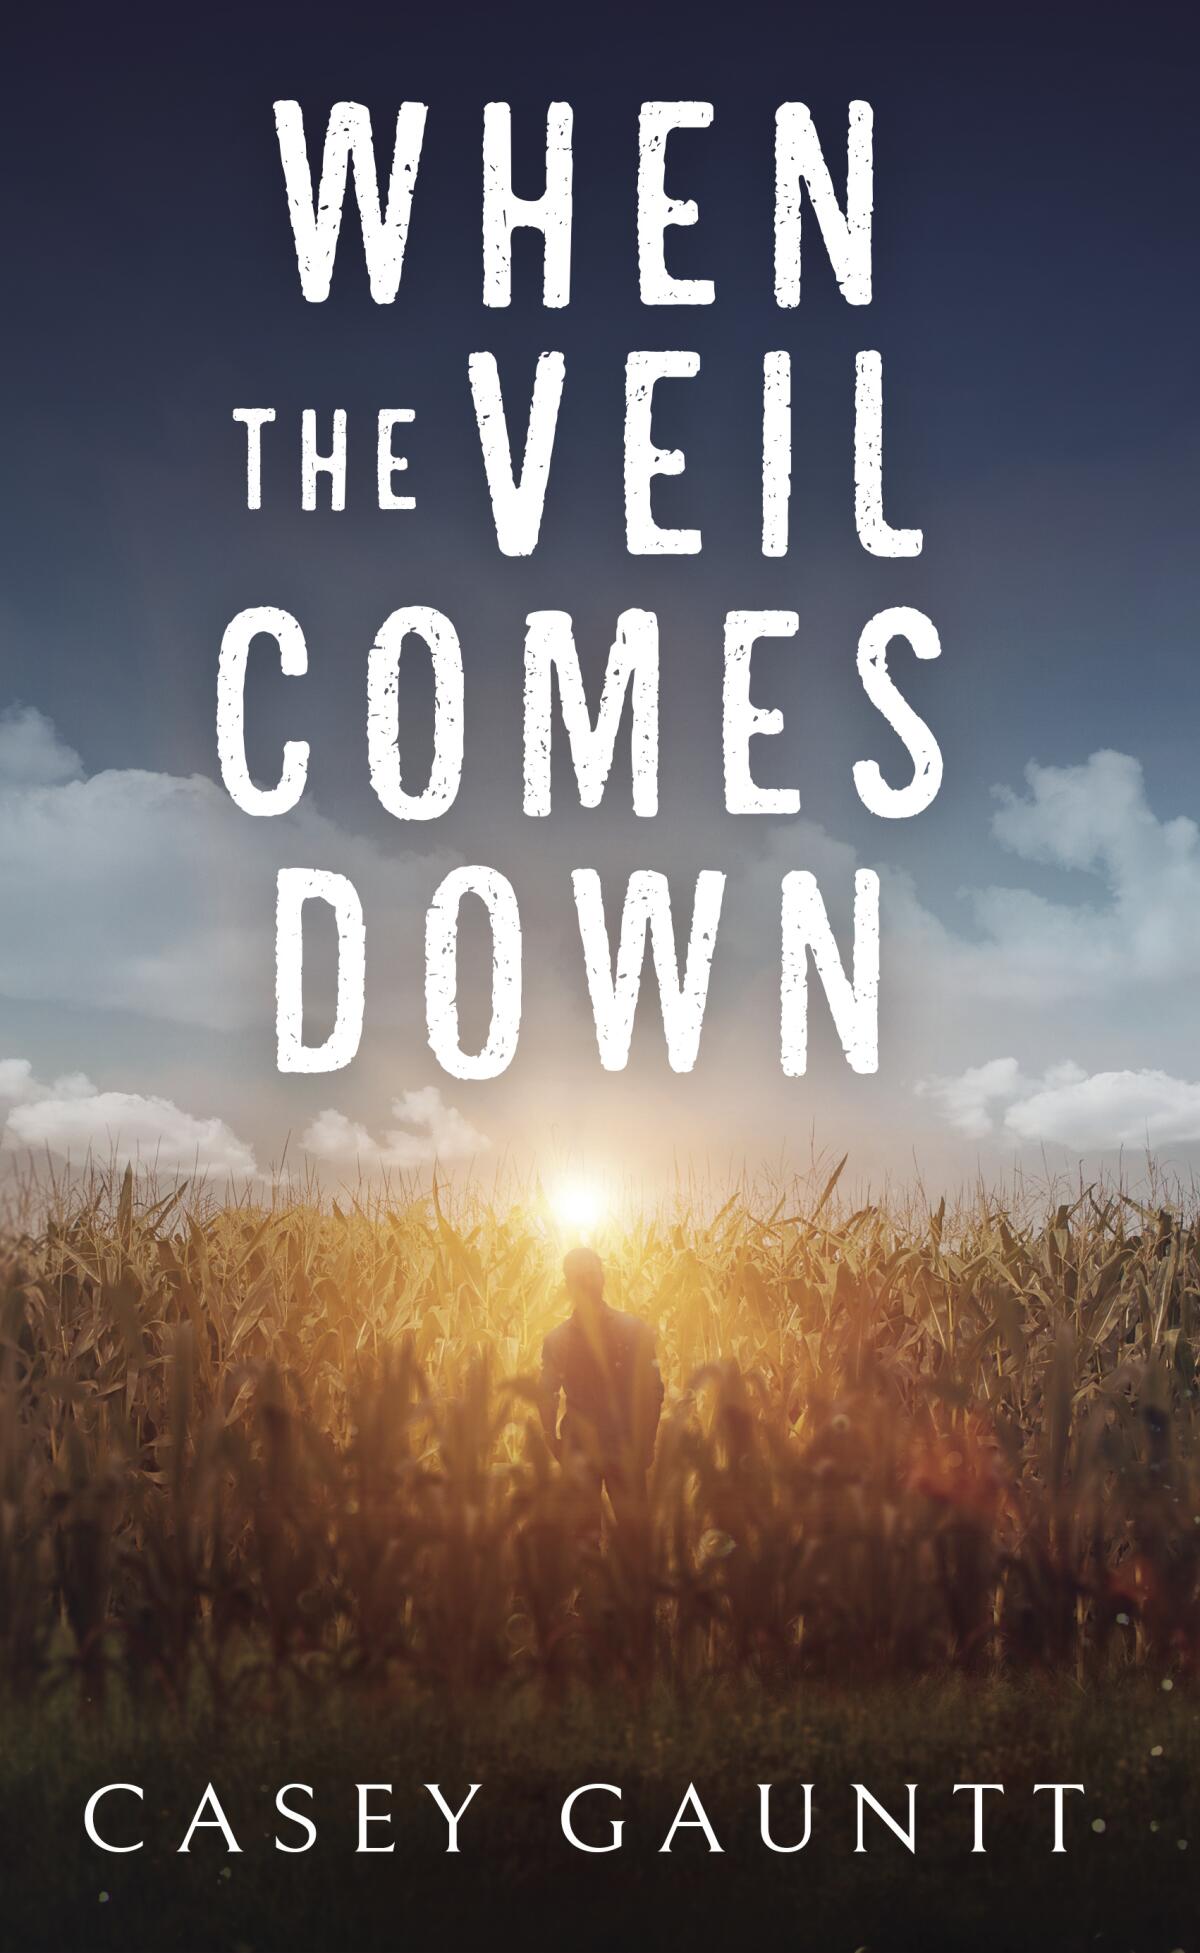 "When the Veil Comes Down" by Casey Gauntt, a 200-page book published March 2, 2021.